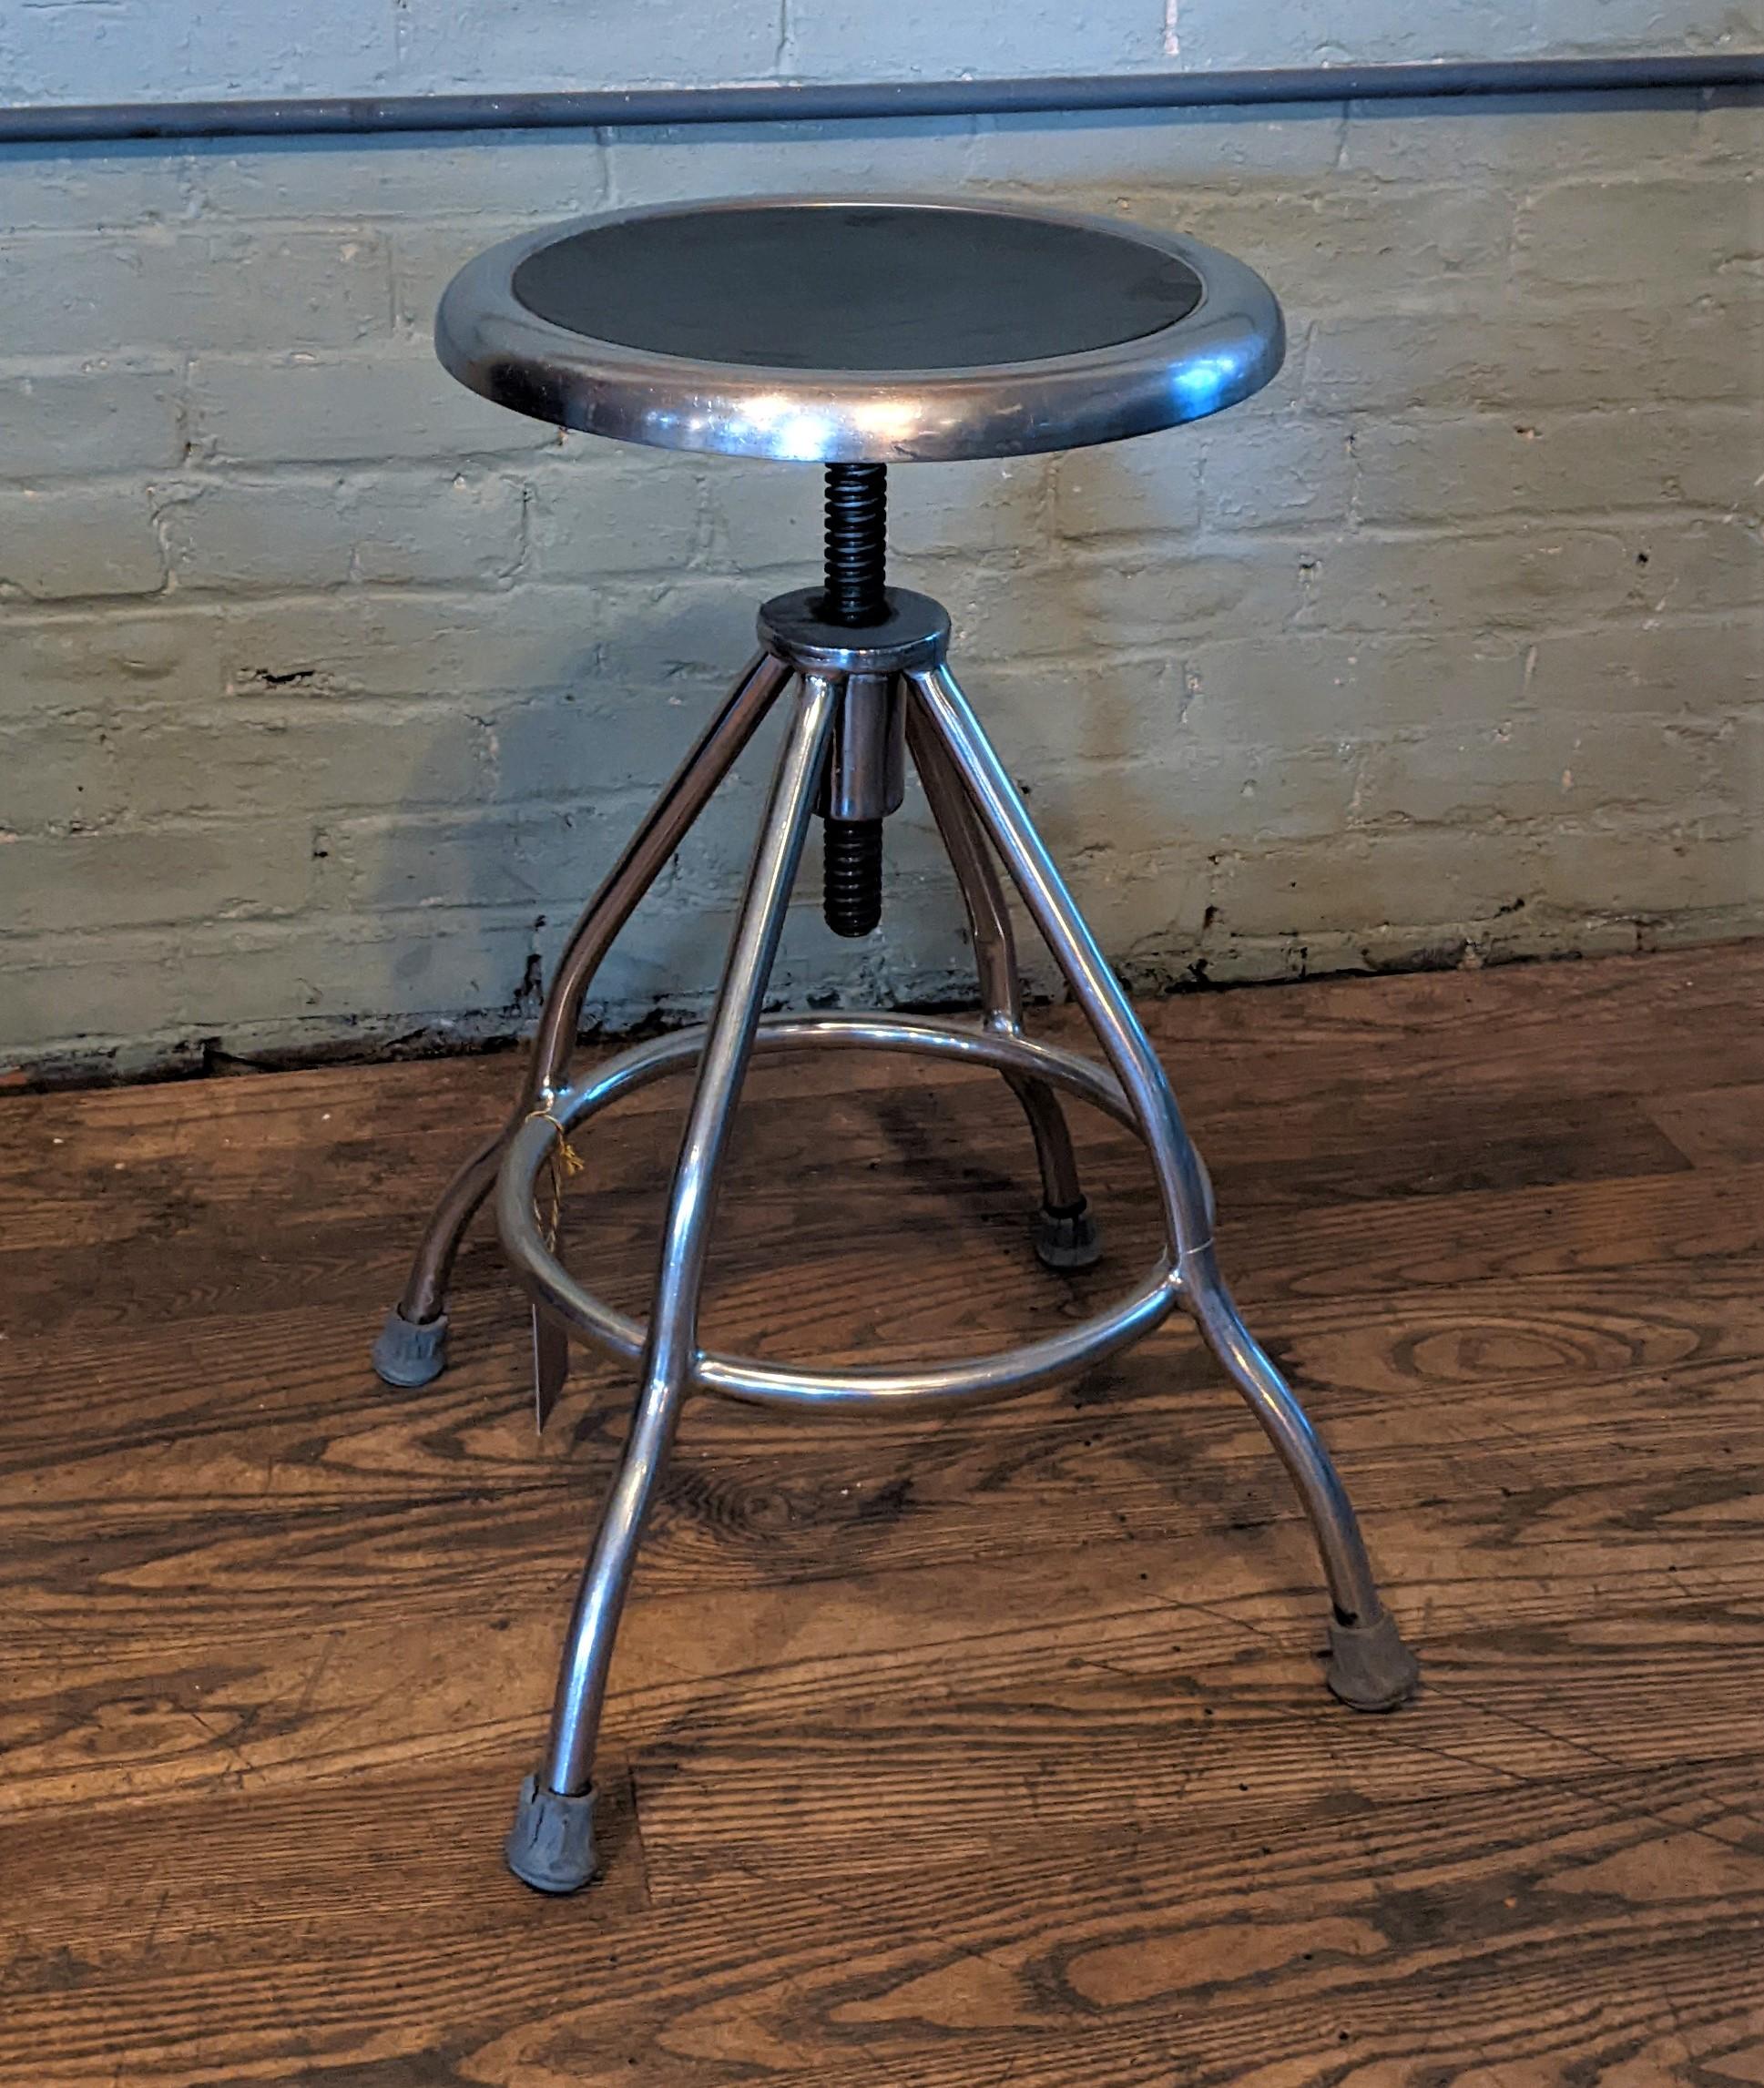 Medical stool

Overall Dimensions: 15